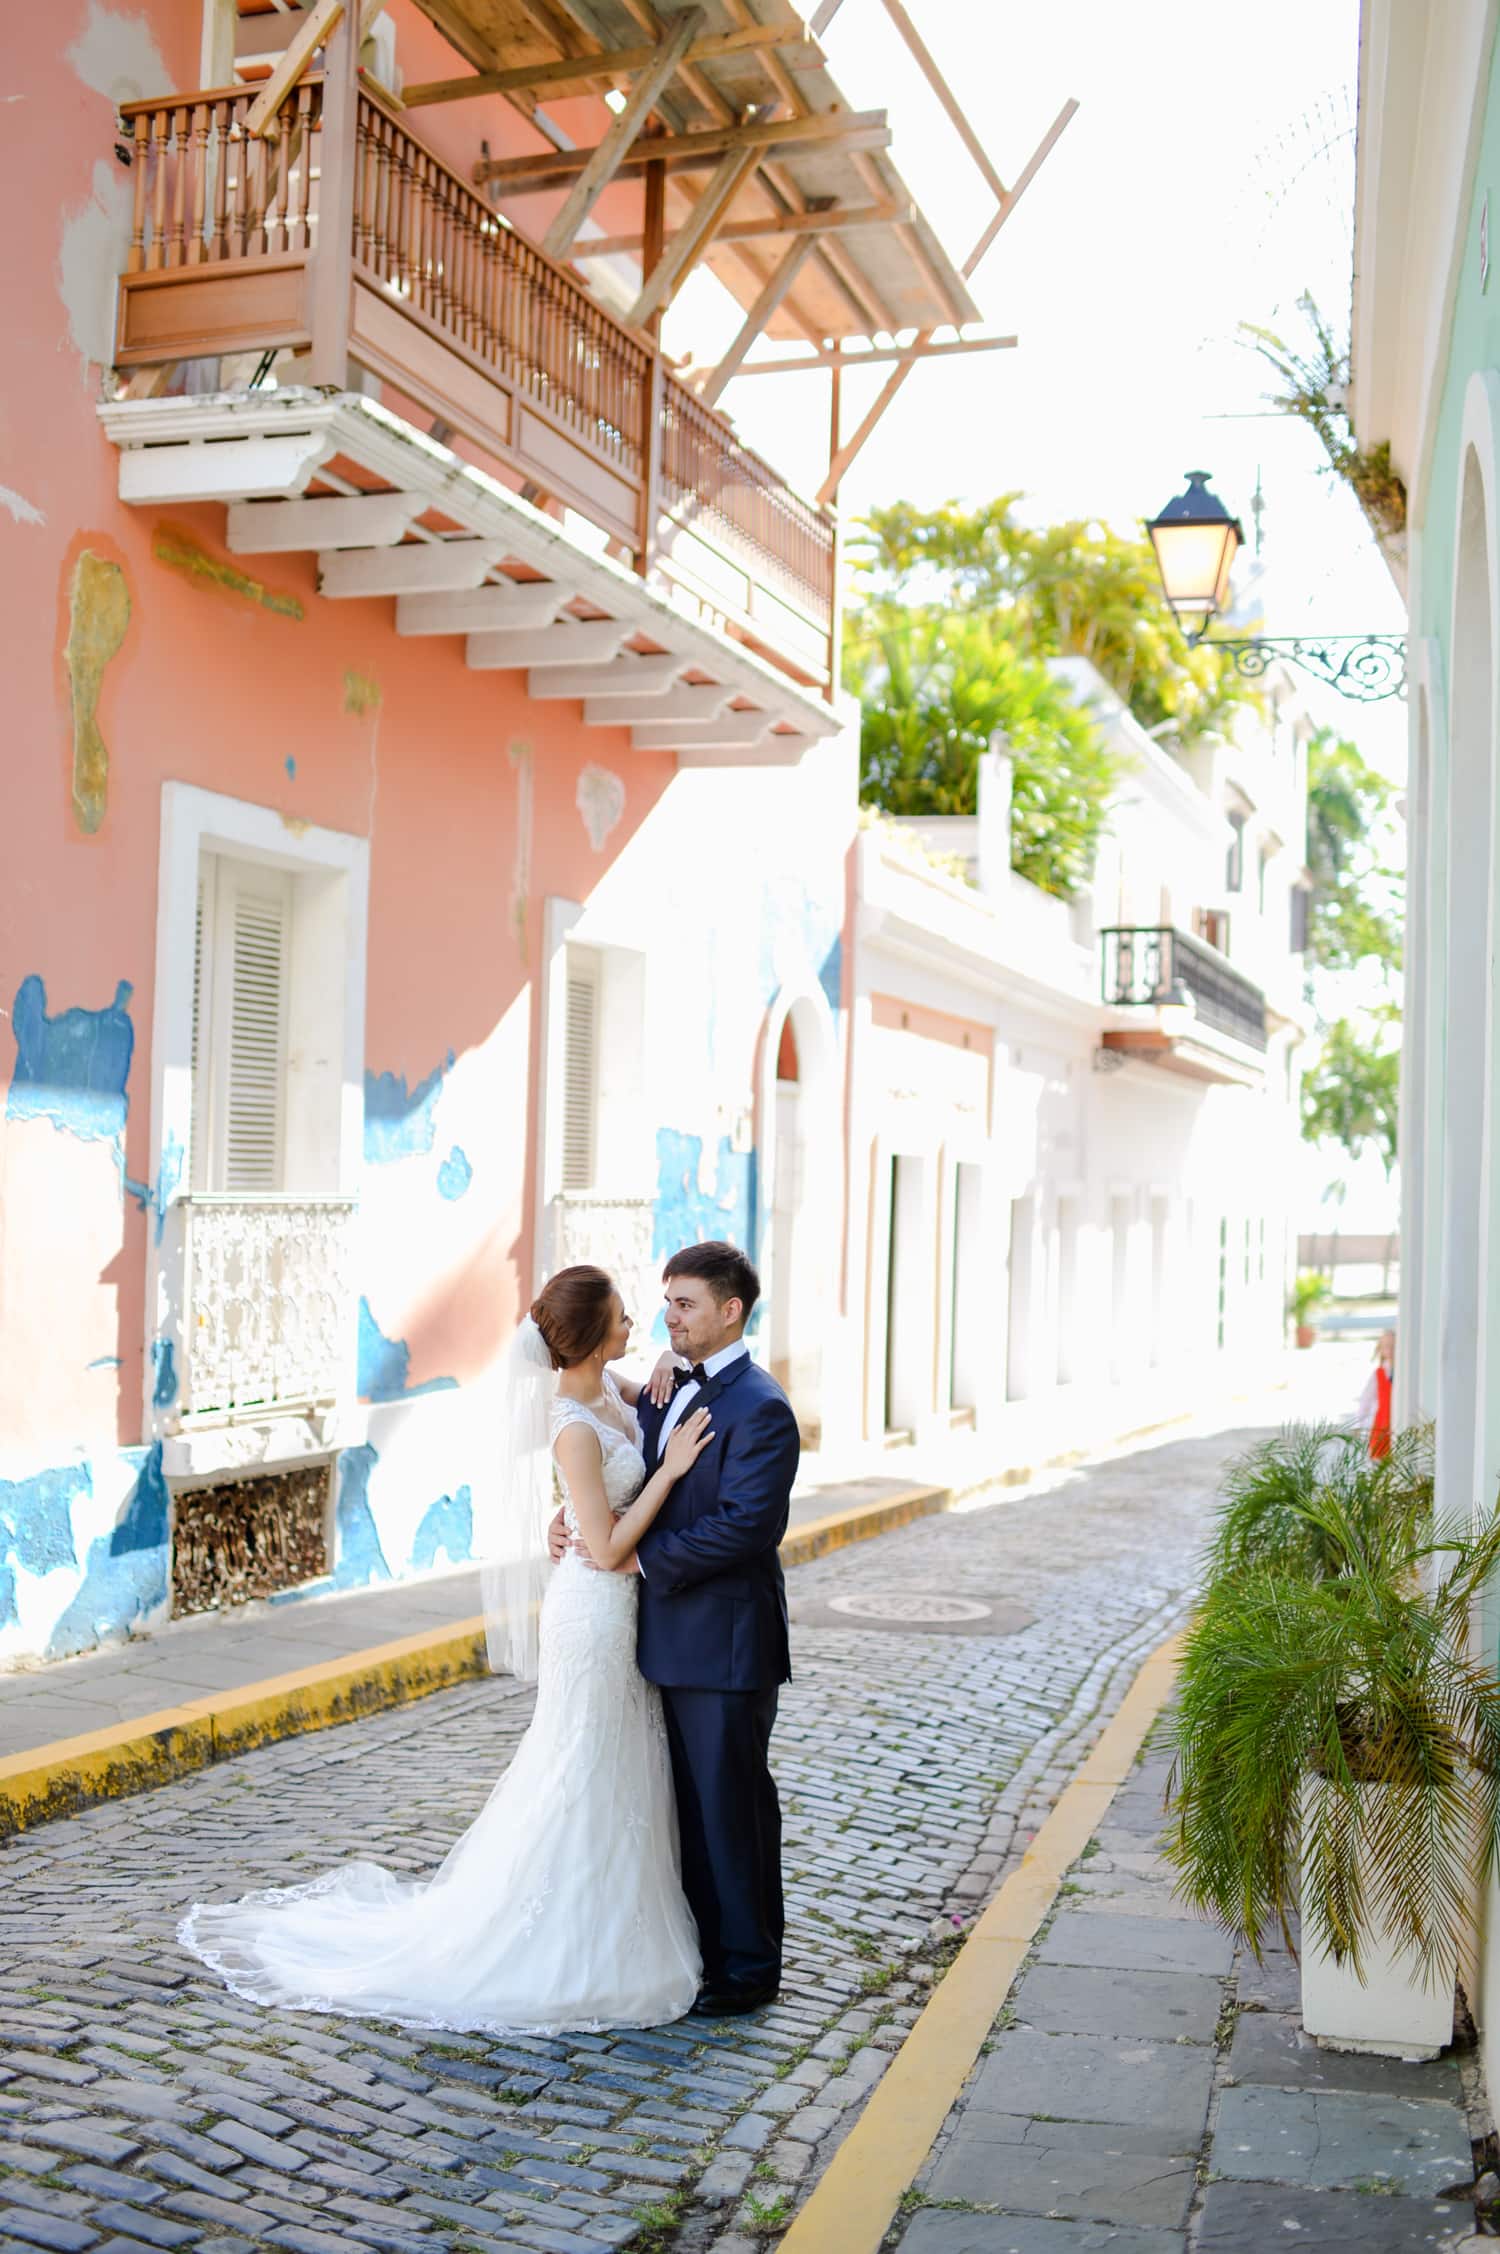 Puerto Rico wedding photographer Camille Fontanez shares an elopement portrait session in Old San Juan